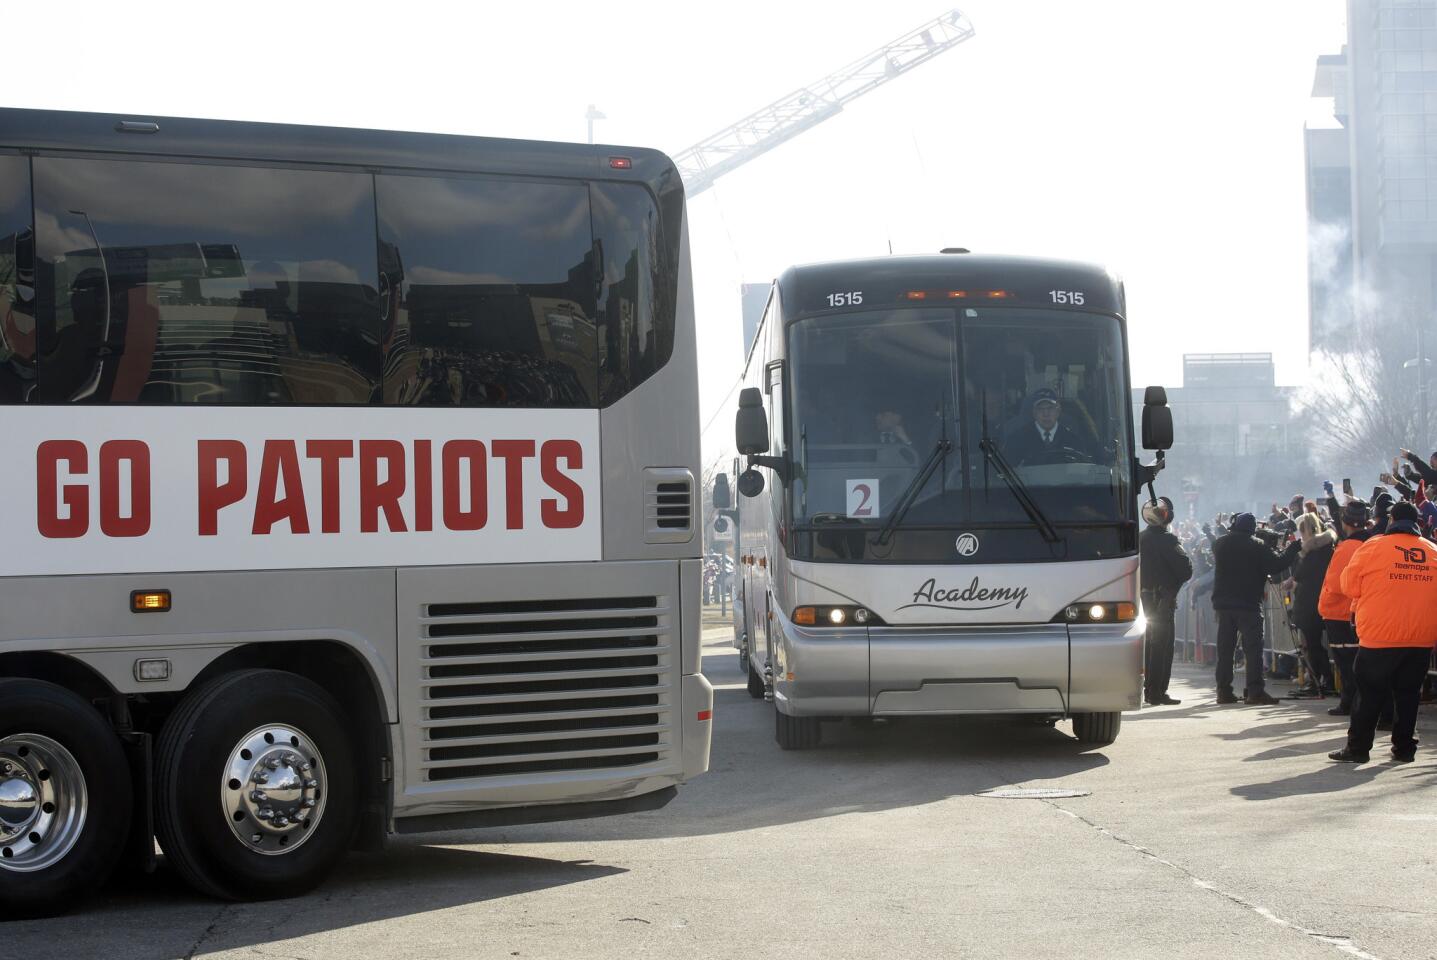 Buses carrying members of the New England Patriots football team depart Gillette Stadium, in Foxborough, Mass., on their way to Atlanta, Ga., following an NFL Super Bowl send-off rally for the team, Sunday, Jan. 27, 2019. The Los Angeles Rams are to play the New England Patriots in Super Bowl 53 on Feb. 3, in Atlanta.